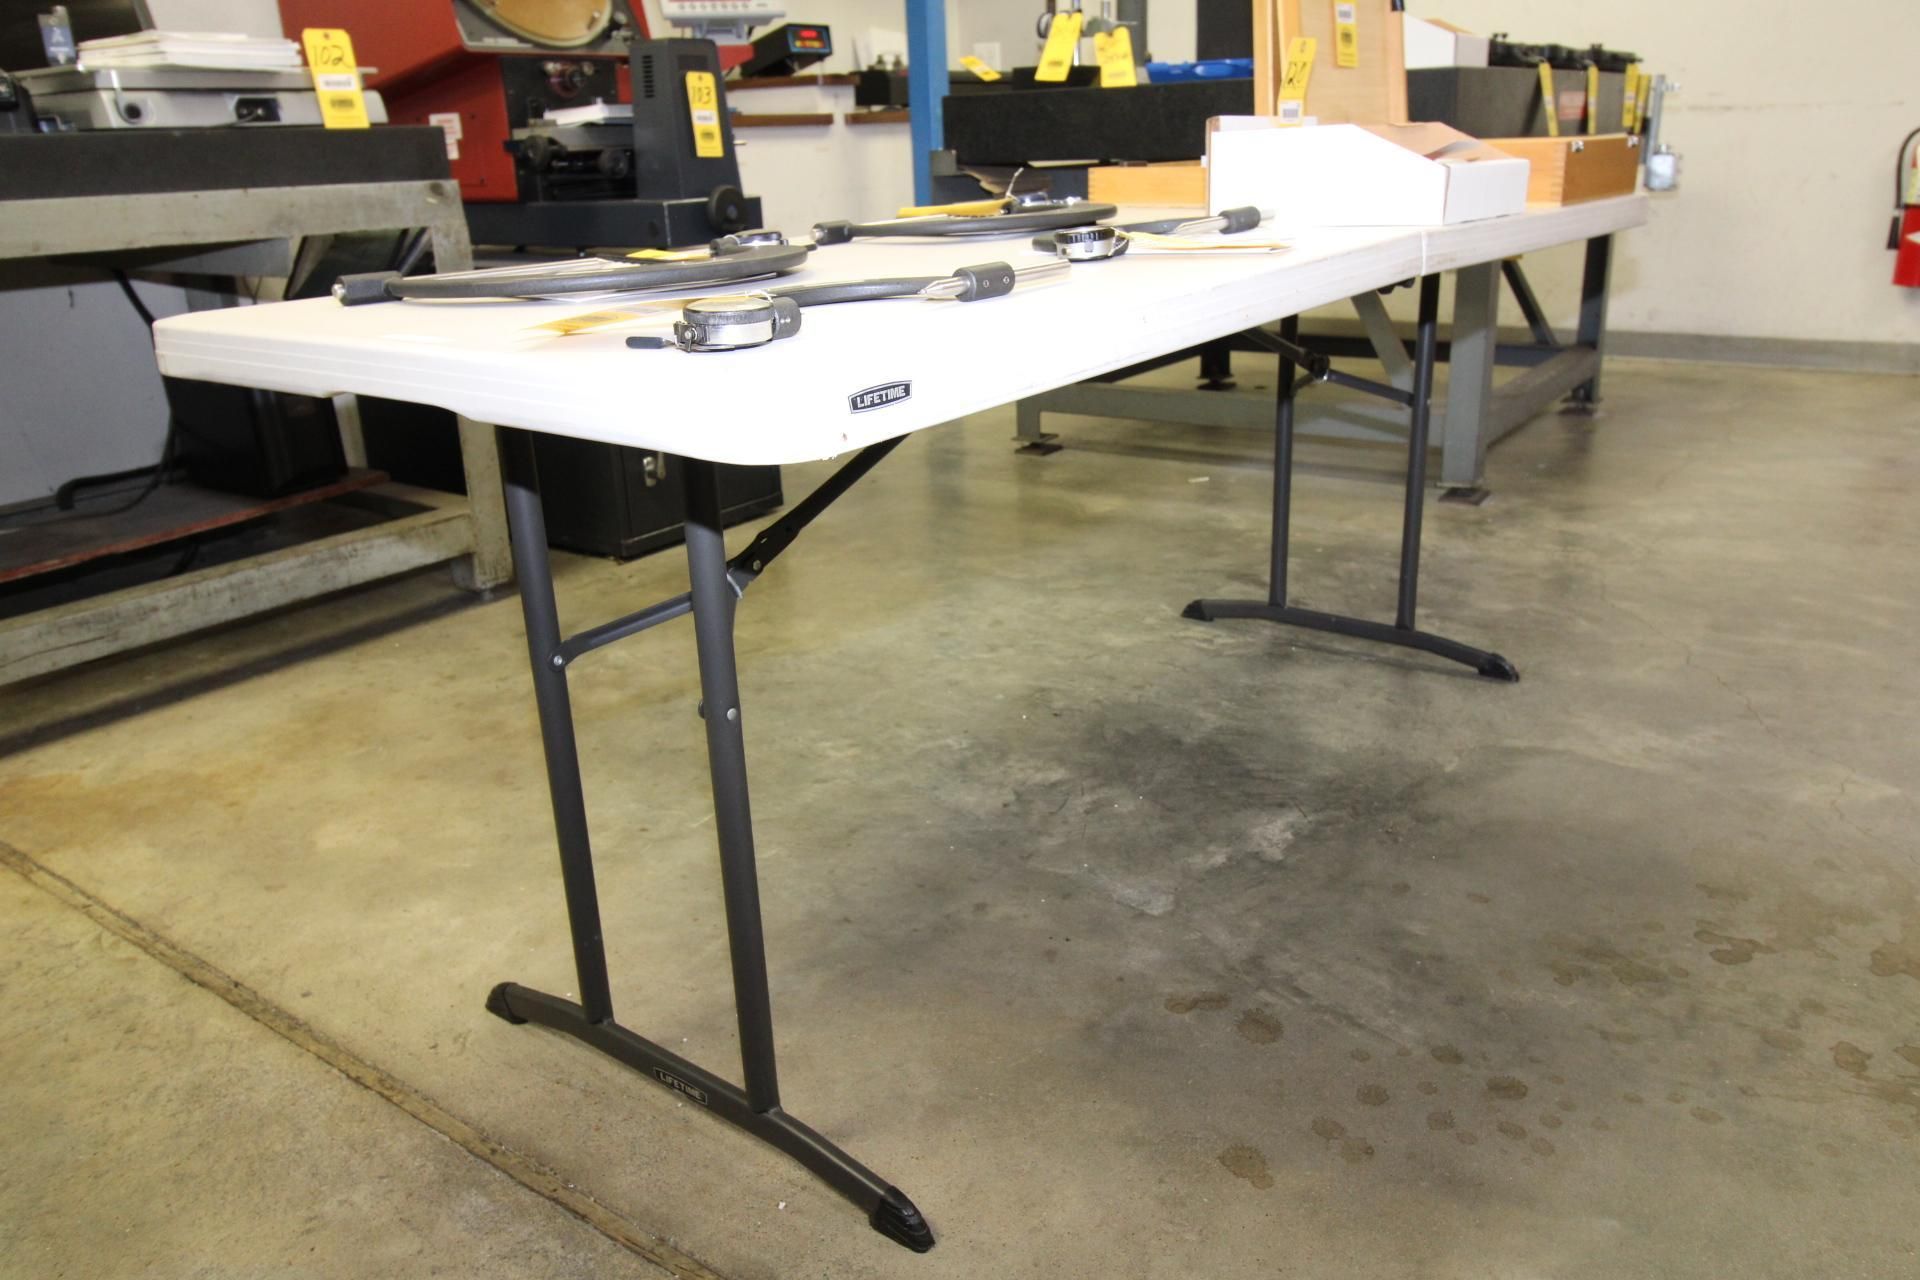 LOT OF LIFETIME CENTER FOLDING TABLES (3), 30"W. x 72"L. (Note: two week delayed removal) - Image 2 of 5